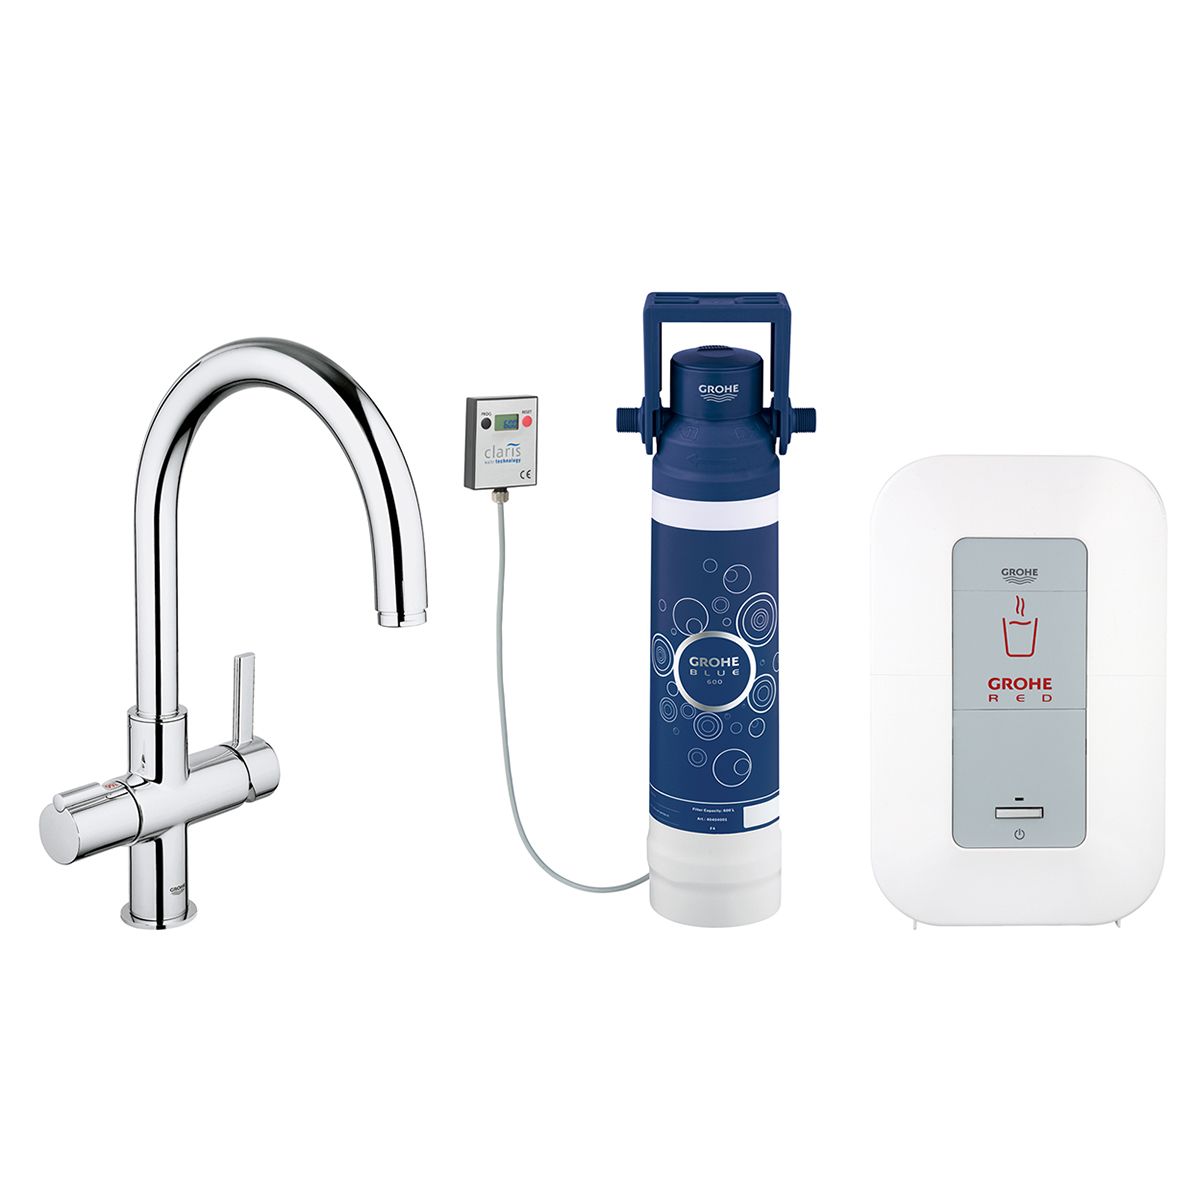 hoop Succes per ongeluk Grohe Red Duo Kitchen Tap and Single Boiler review